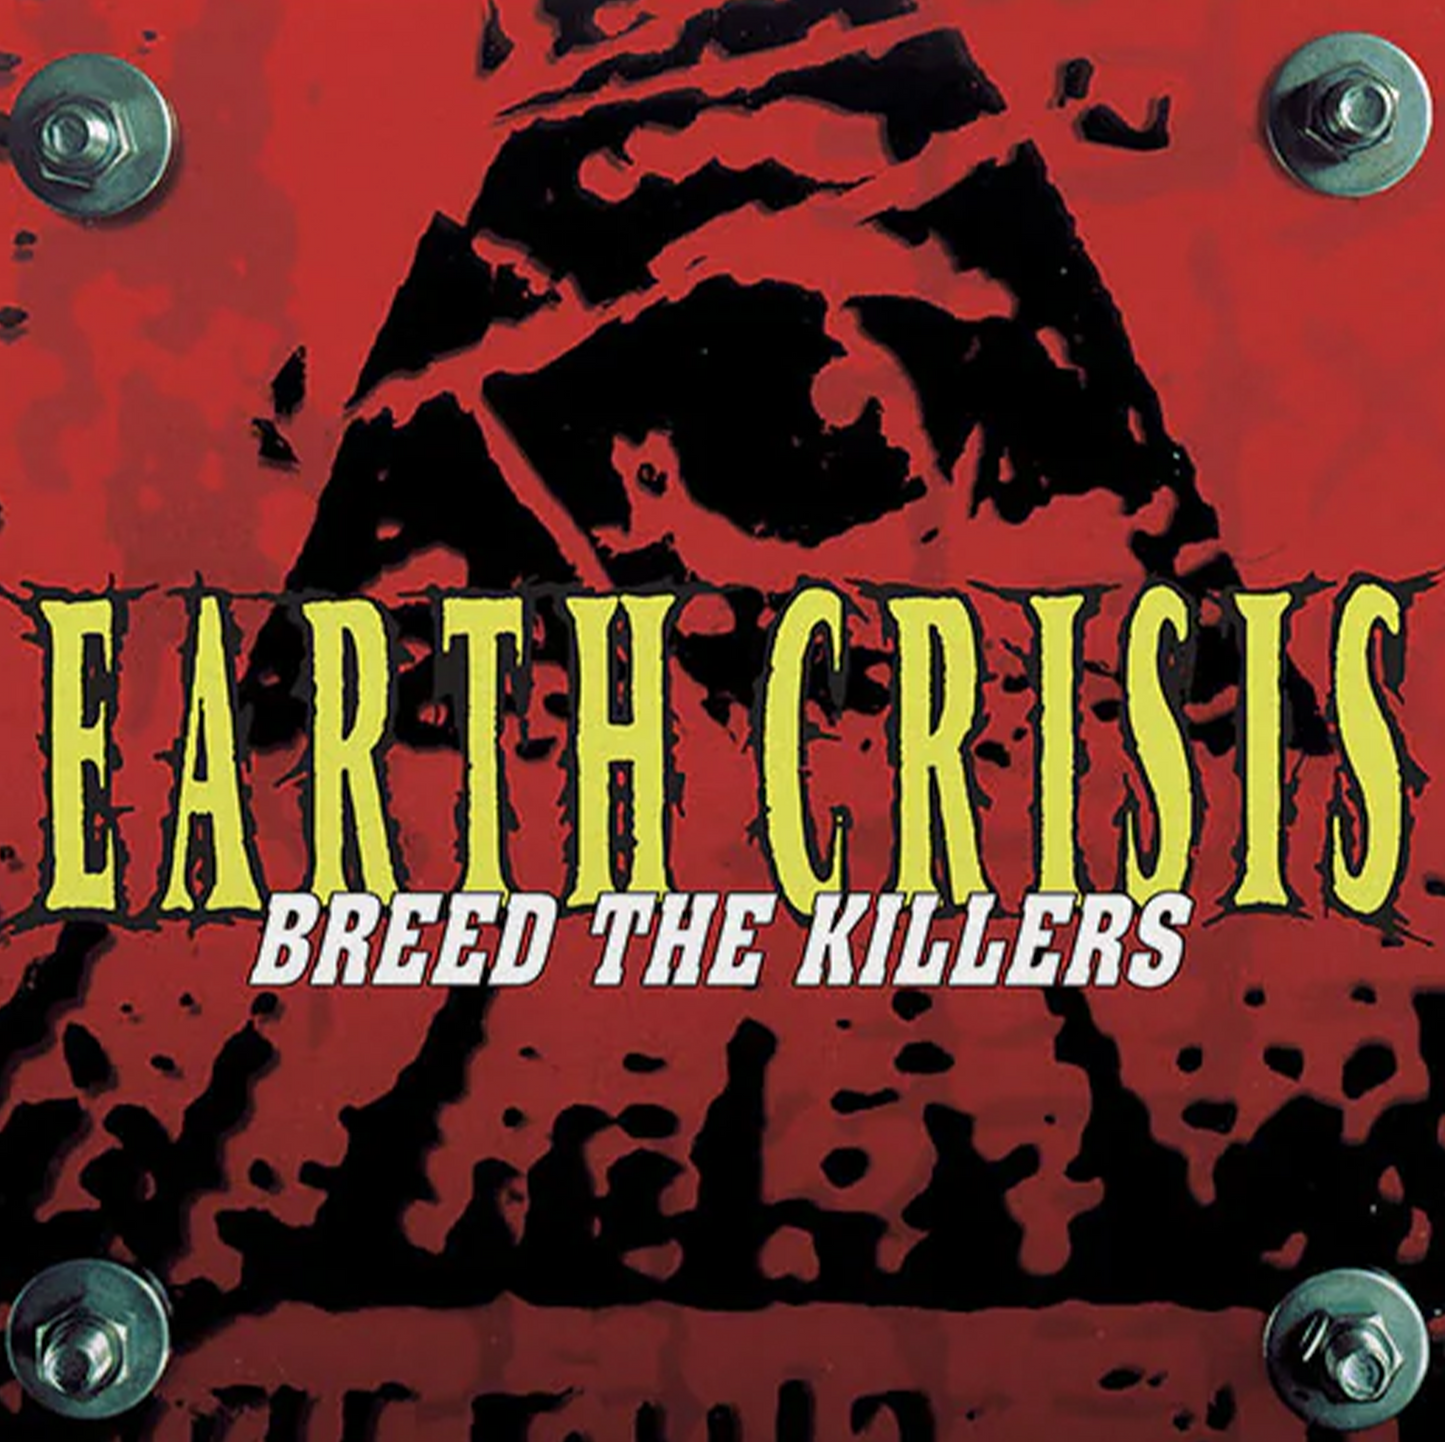 Earth Crisis "Breed The Killers" 25th Anniversary Edition LP